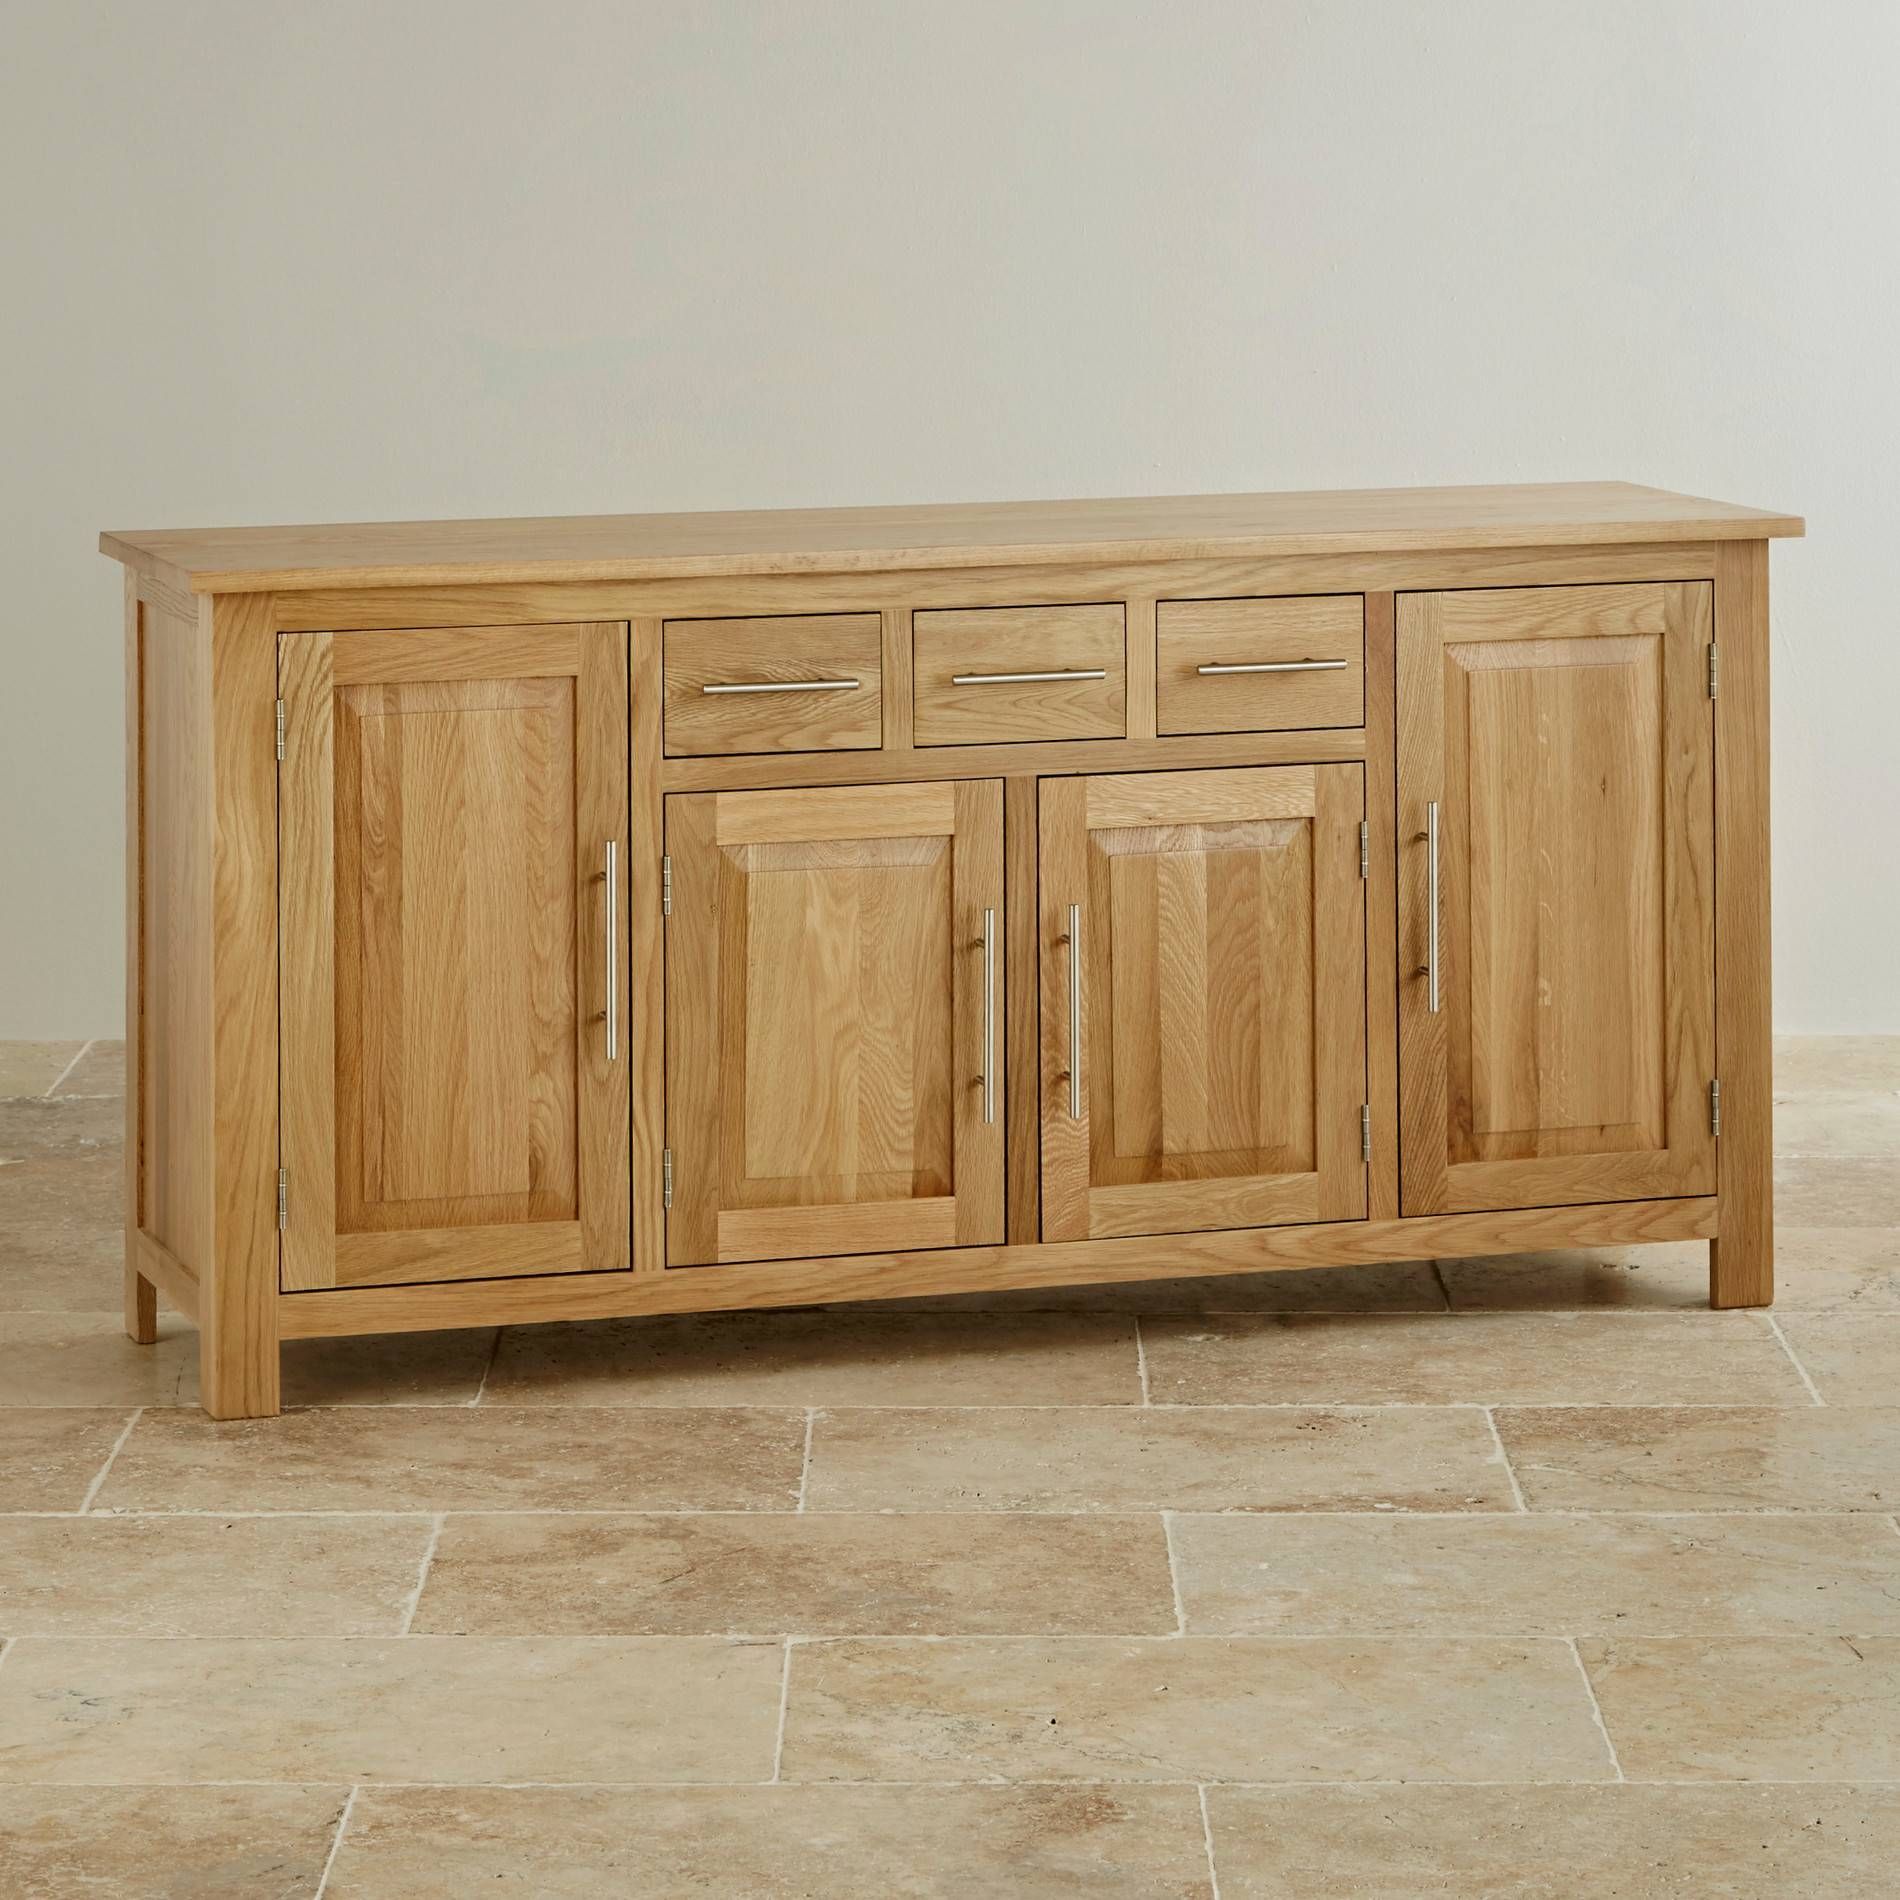 Sideboards | Oak Furniture Land With Regard To Large Sideboards (View 5 of 15)